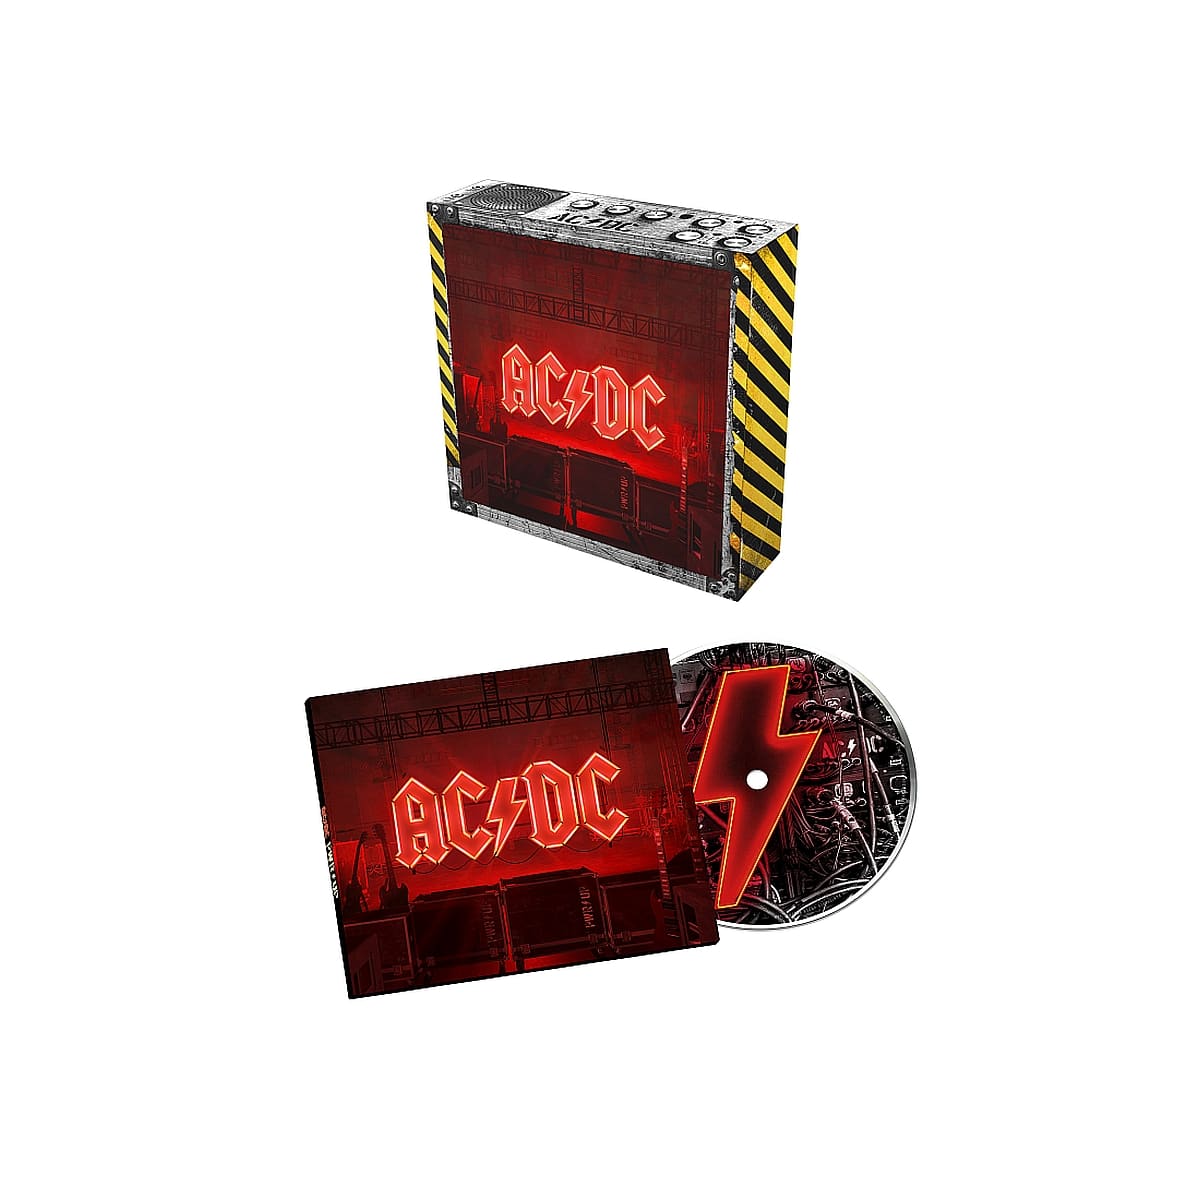 AC/DC Power Up CD limited deluxe box